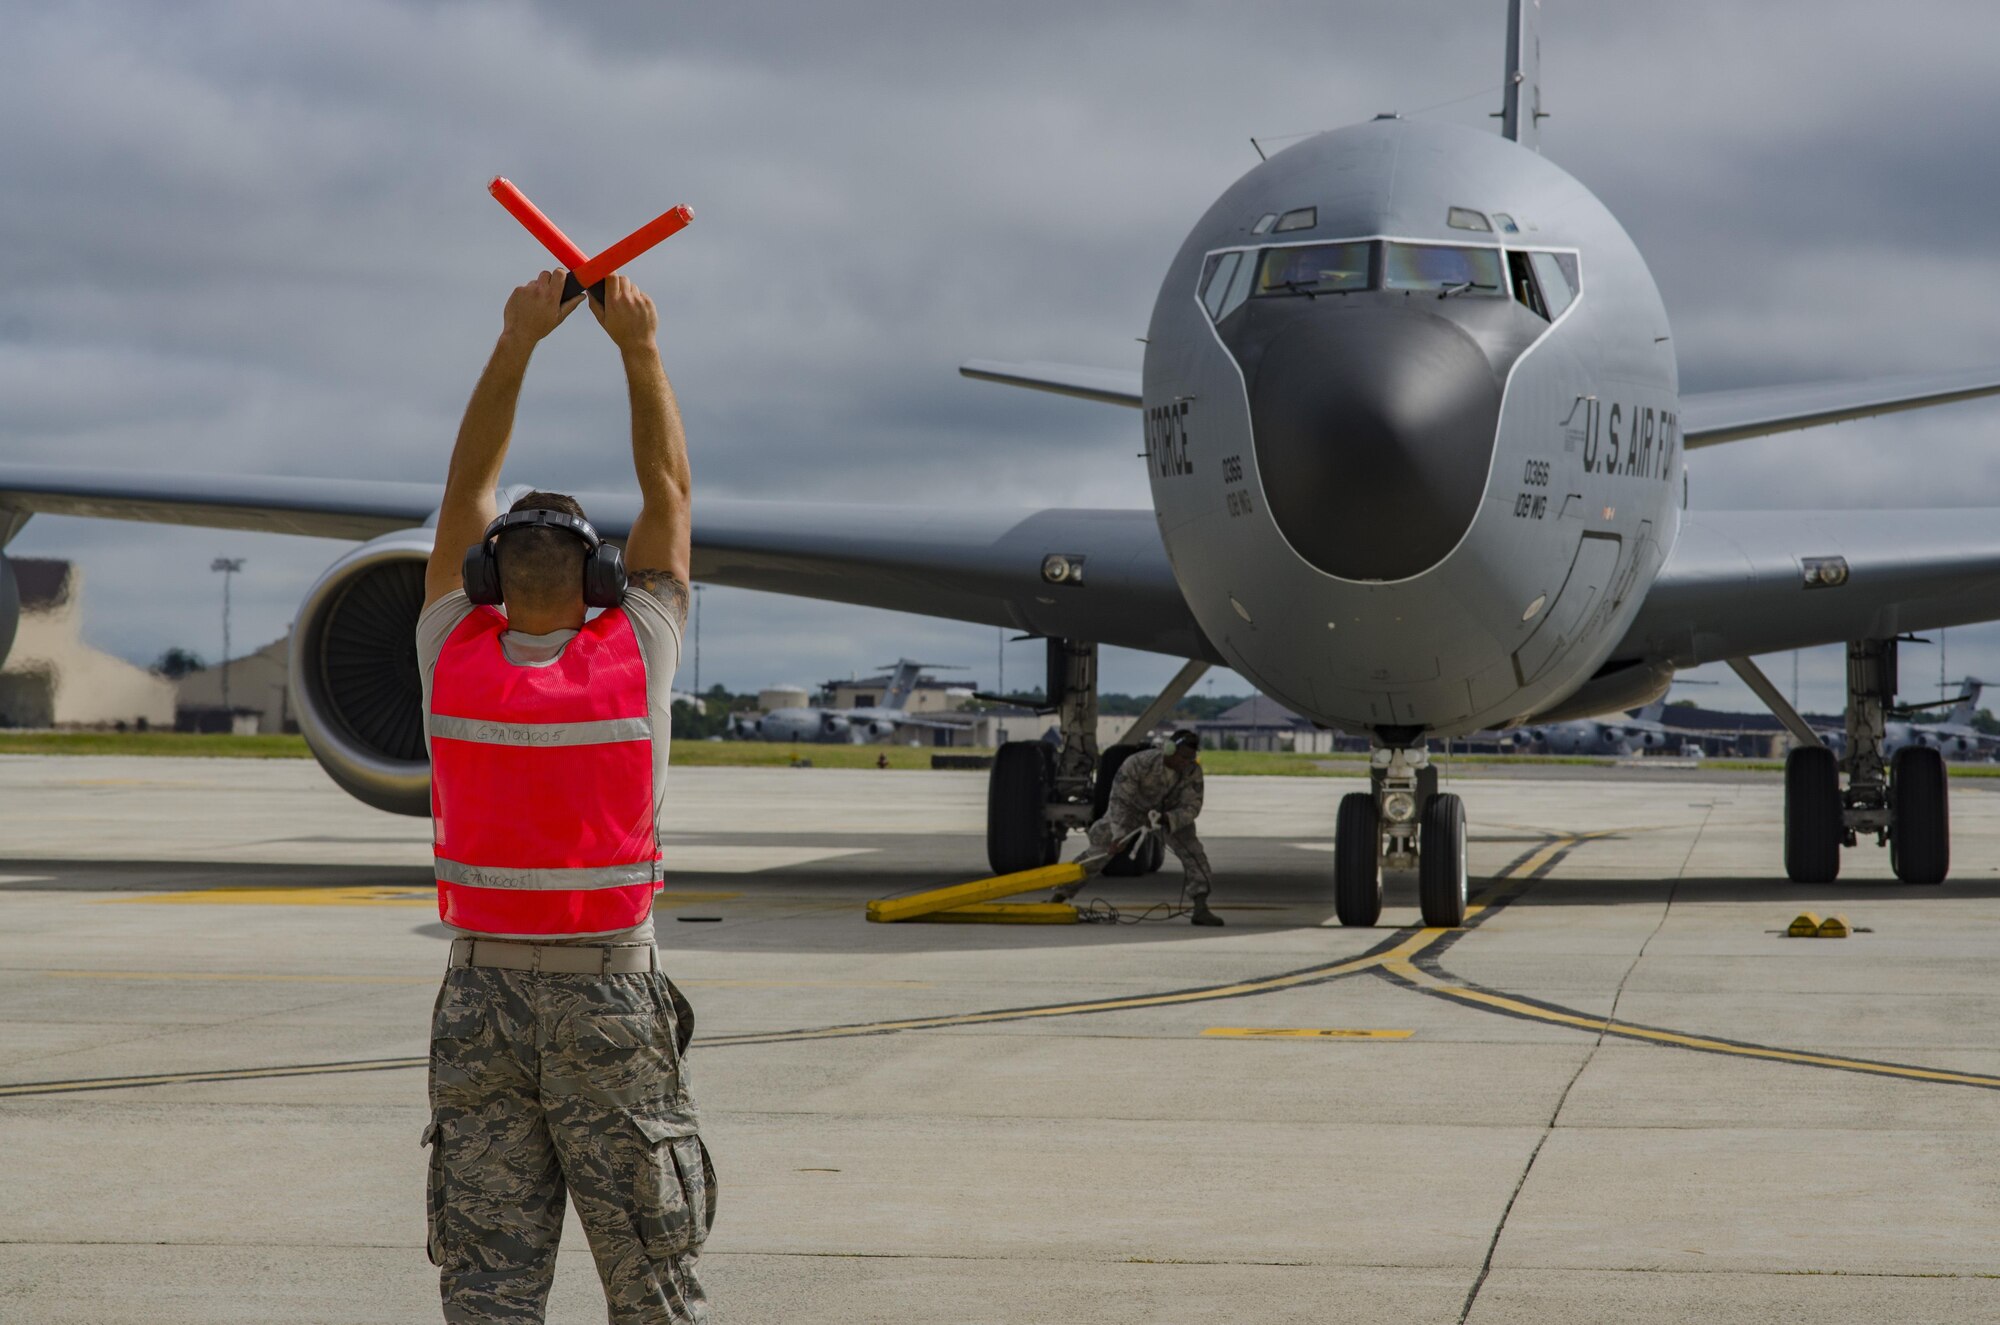 New Jersey Air National Guardsman Senior Airmen Joshua O’Reilly, crew chief, marshals a 108th Wing KC-135 Stratotanker to its parking spot on the flight line at Joint Base McGuire-Dix-Lakehurst, N.J., Sept. 26, 2017. The tanker and its crew returned from supporting Andersen Air Force Base’s ongoing refueling mission. (U.S. Air National Guard photo by Staff Sgt. Ross A. Whitley/Released)